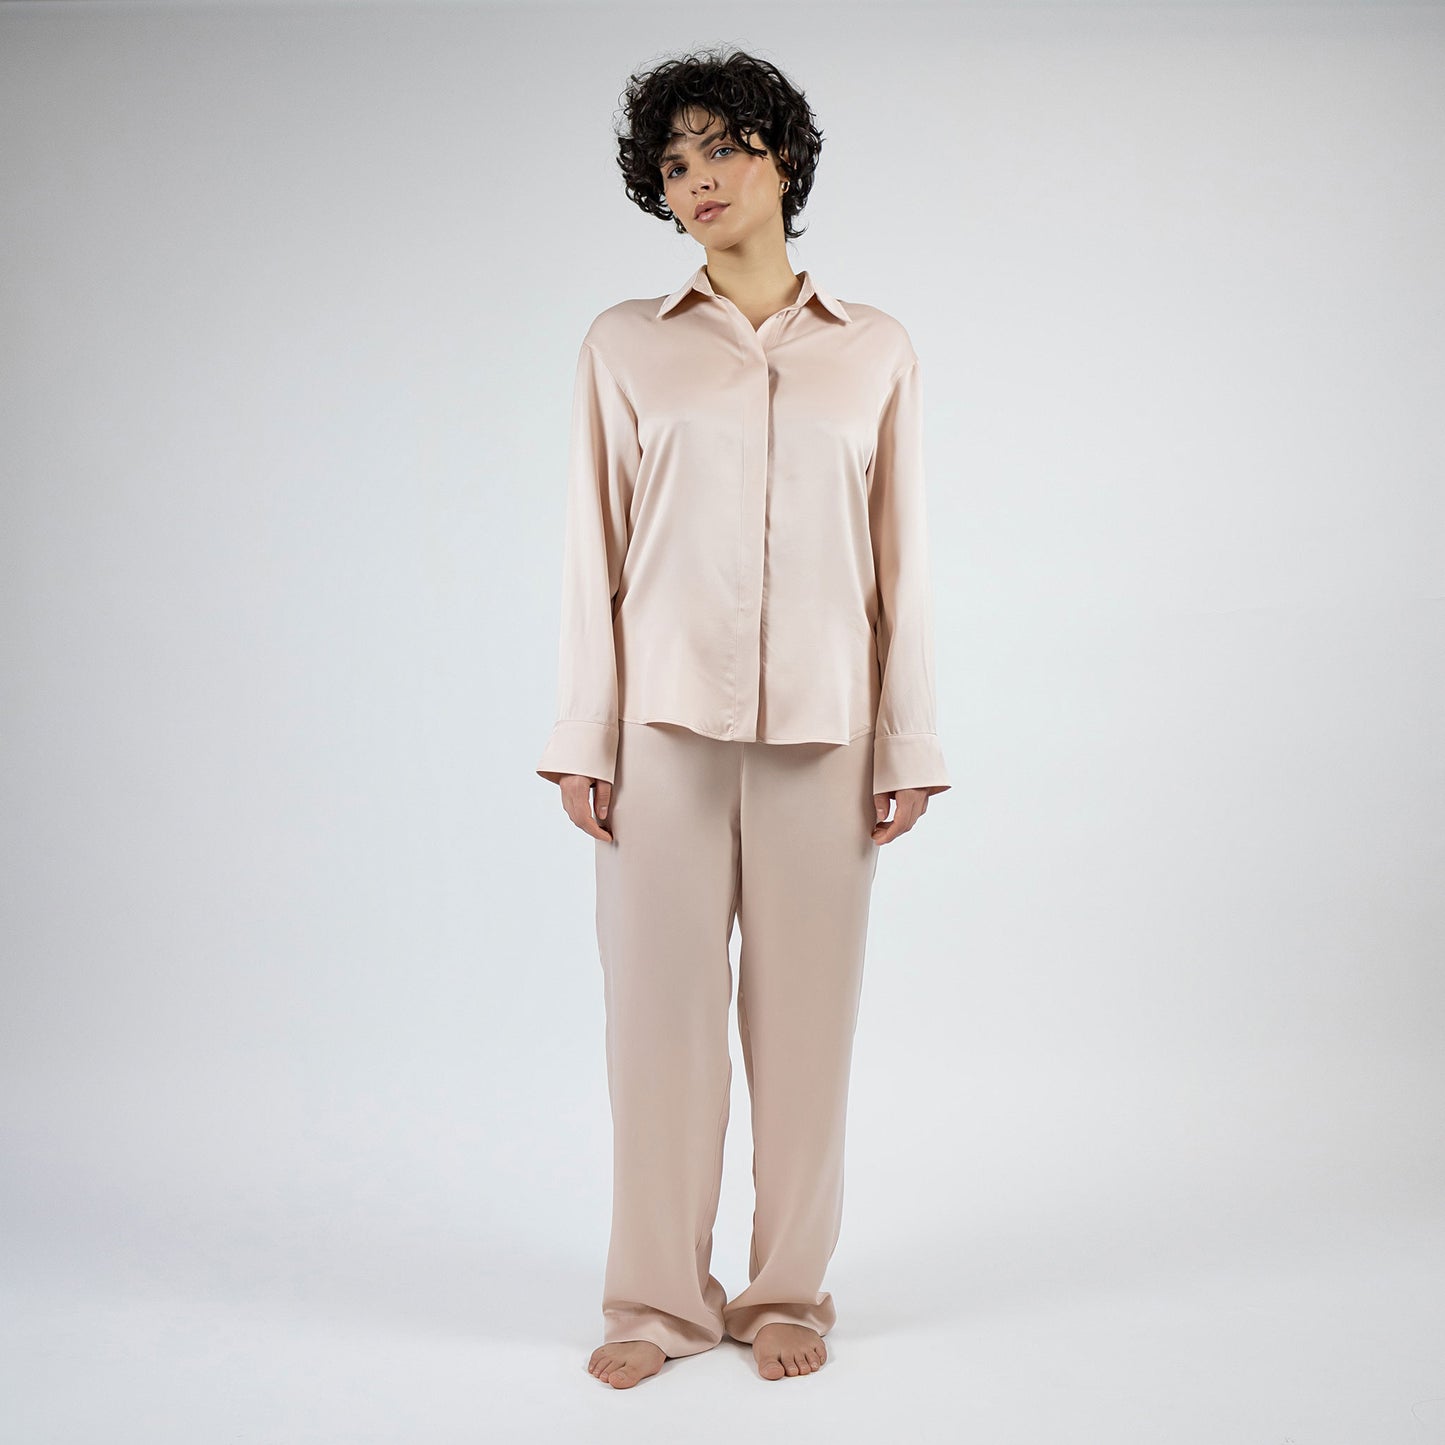 Pyjama shirt in Transcendent Pink made from 100% Mulberry Silk